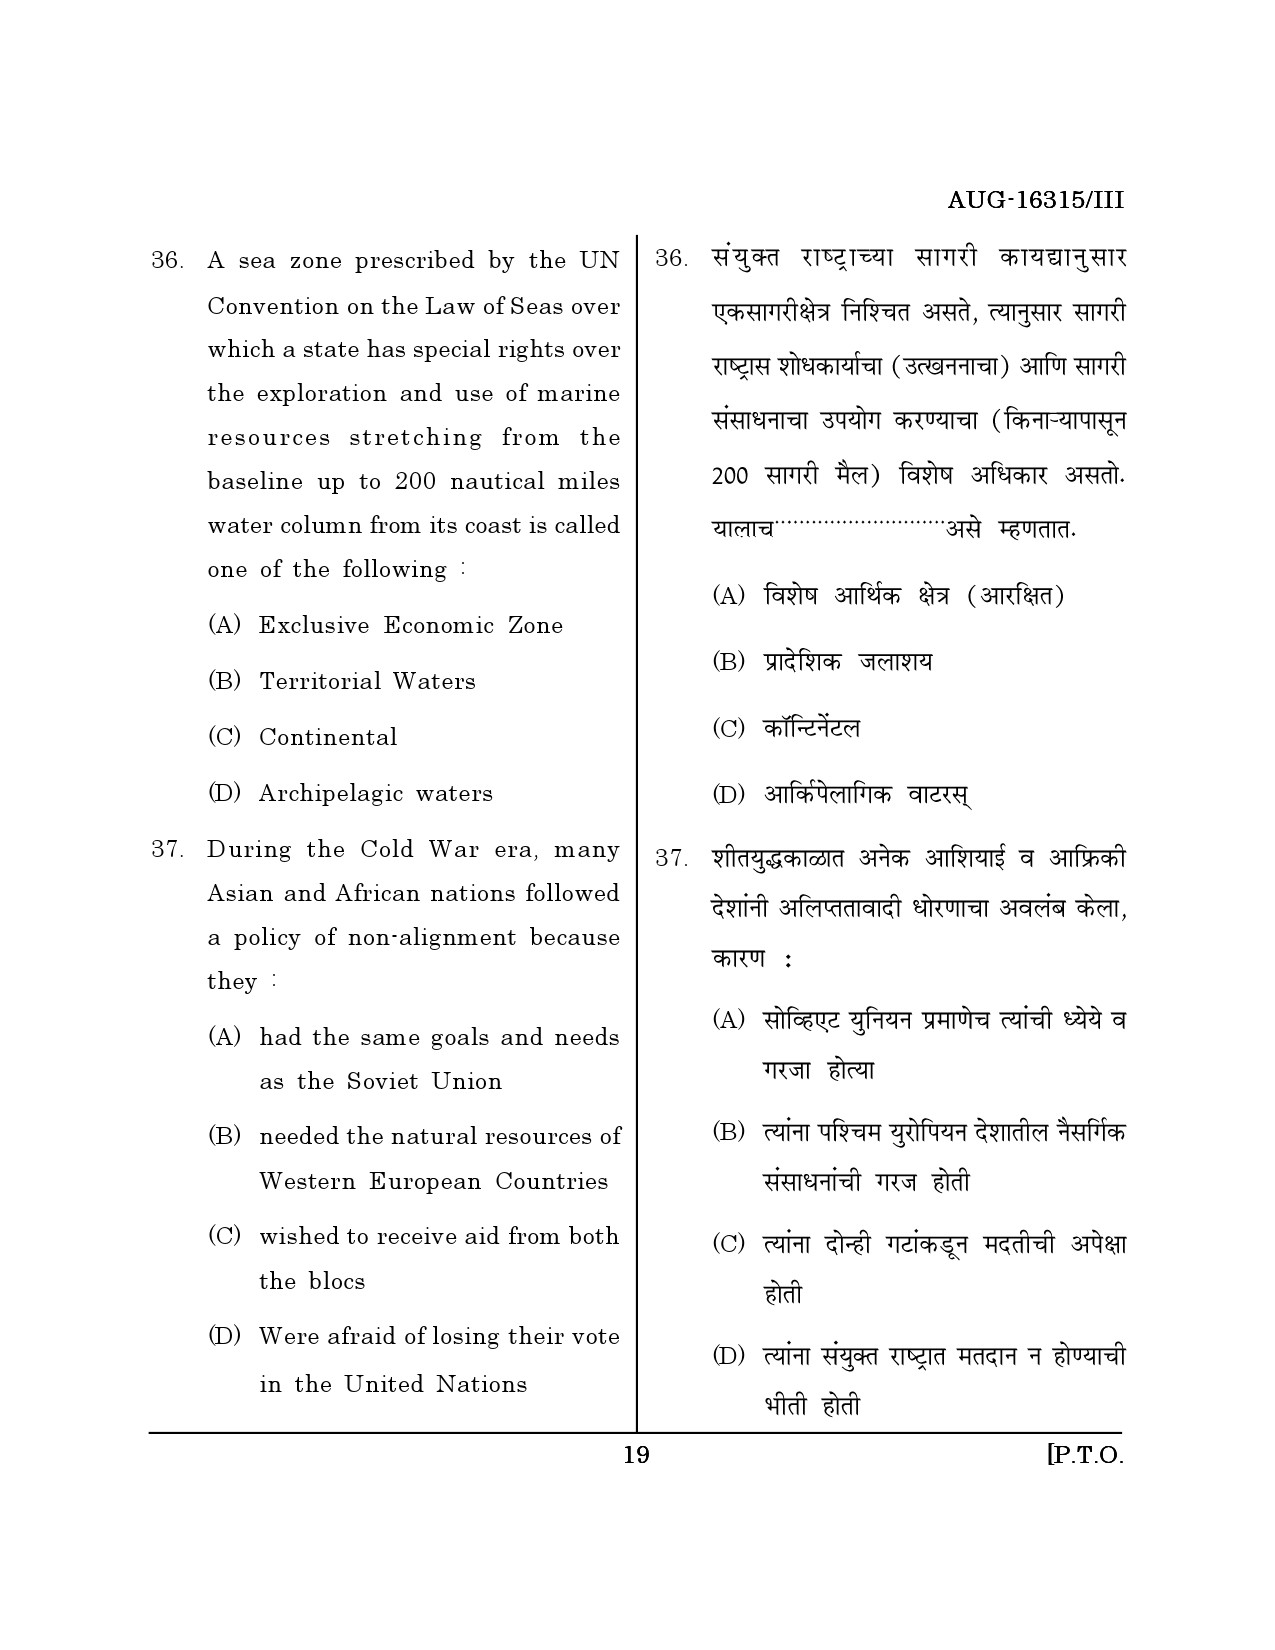 Maharashtra SET Defence and Strategic Studies Question Paper III August 2015 18